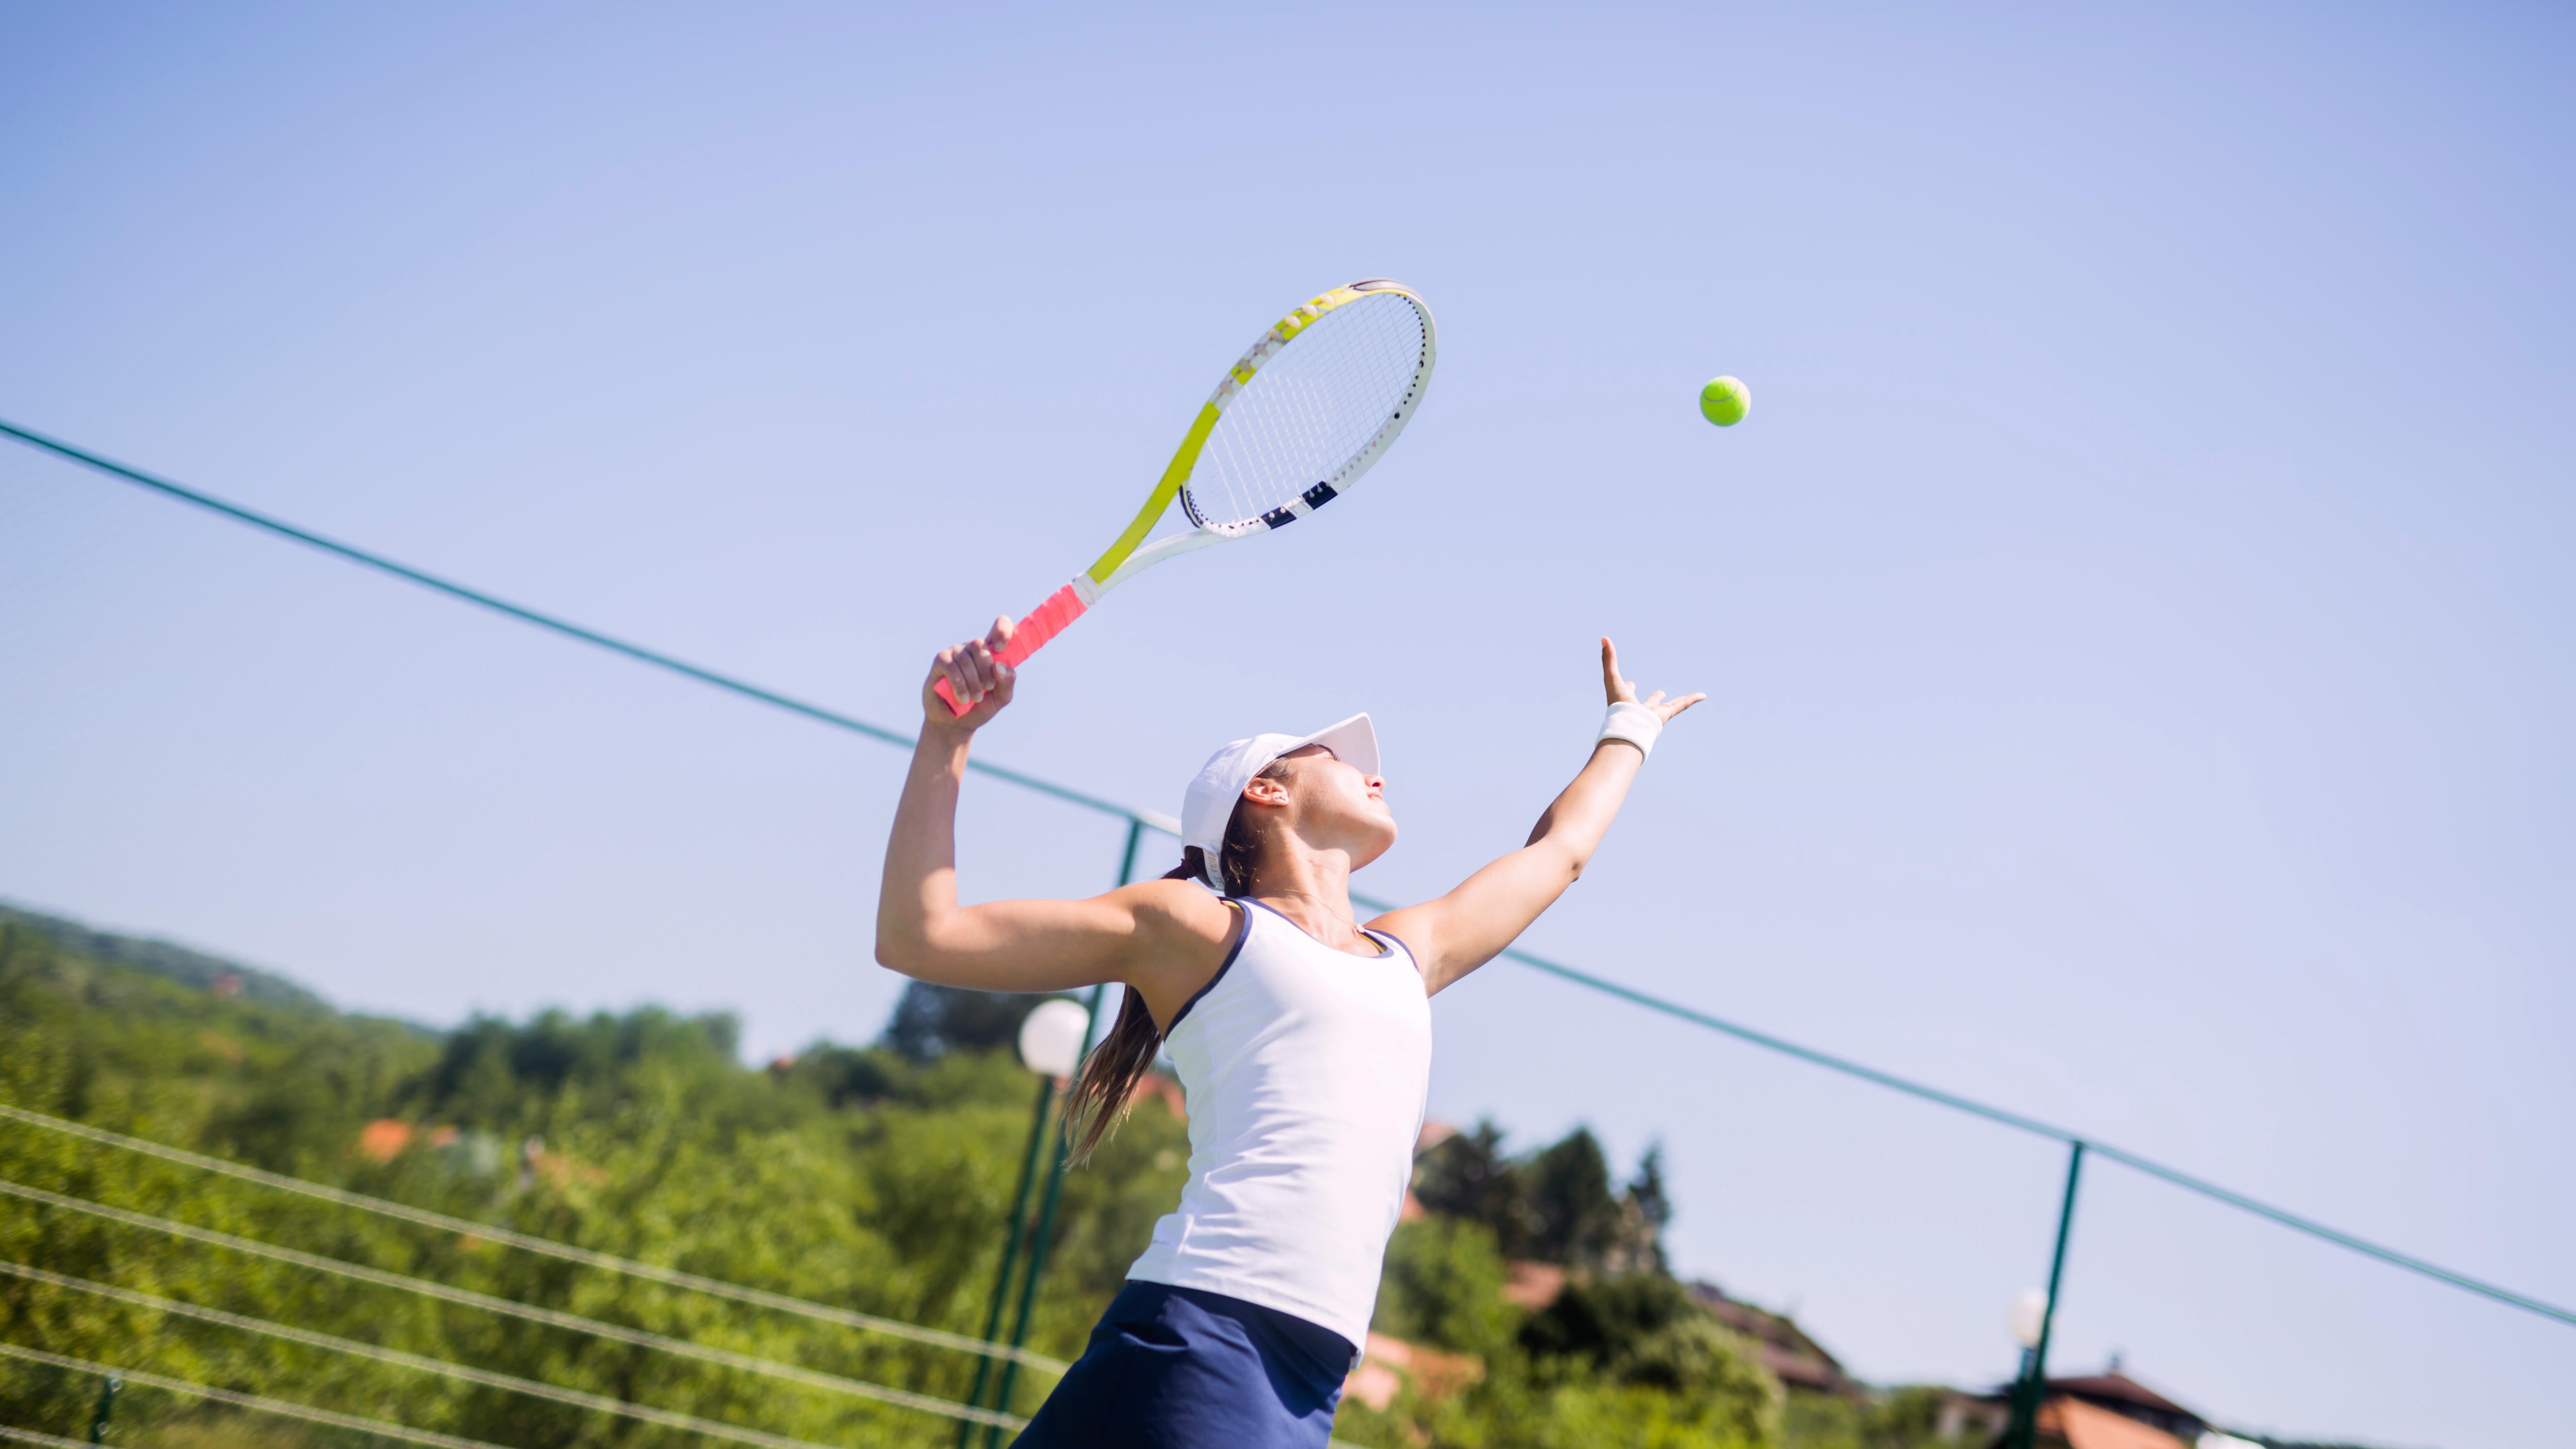 Practise makes perfect when it comes to tennis serves